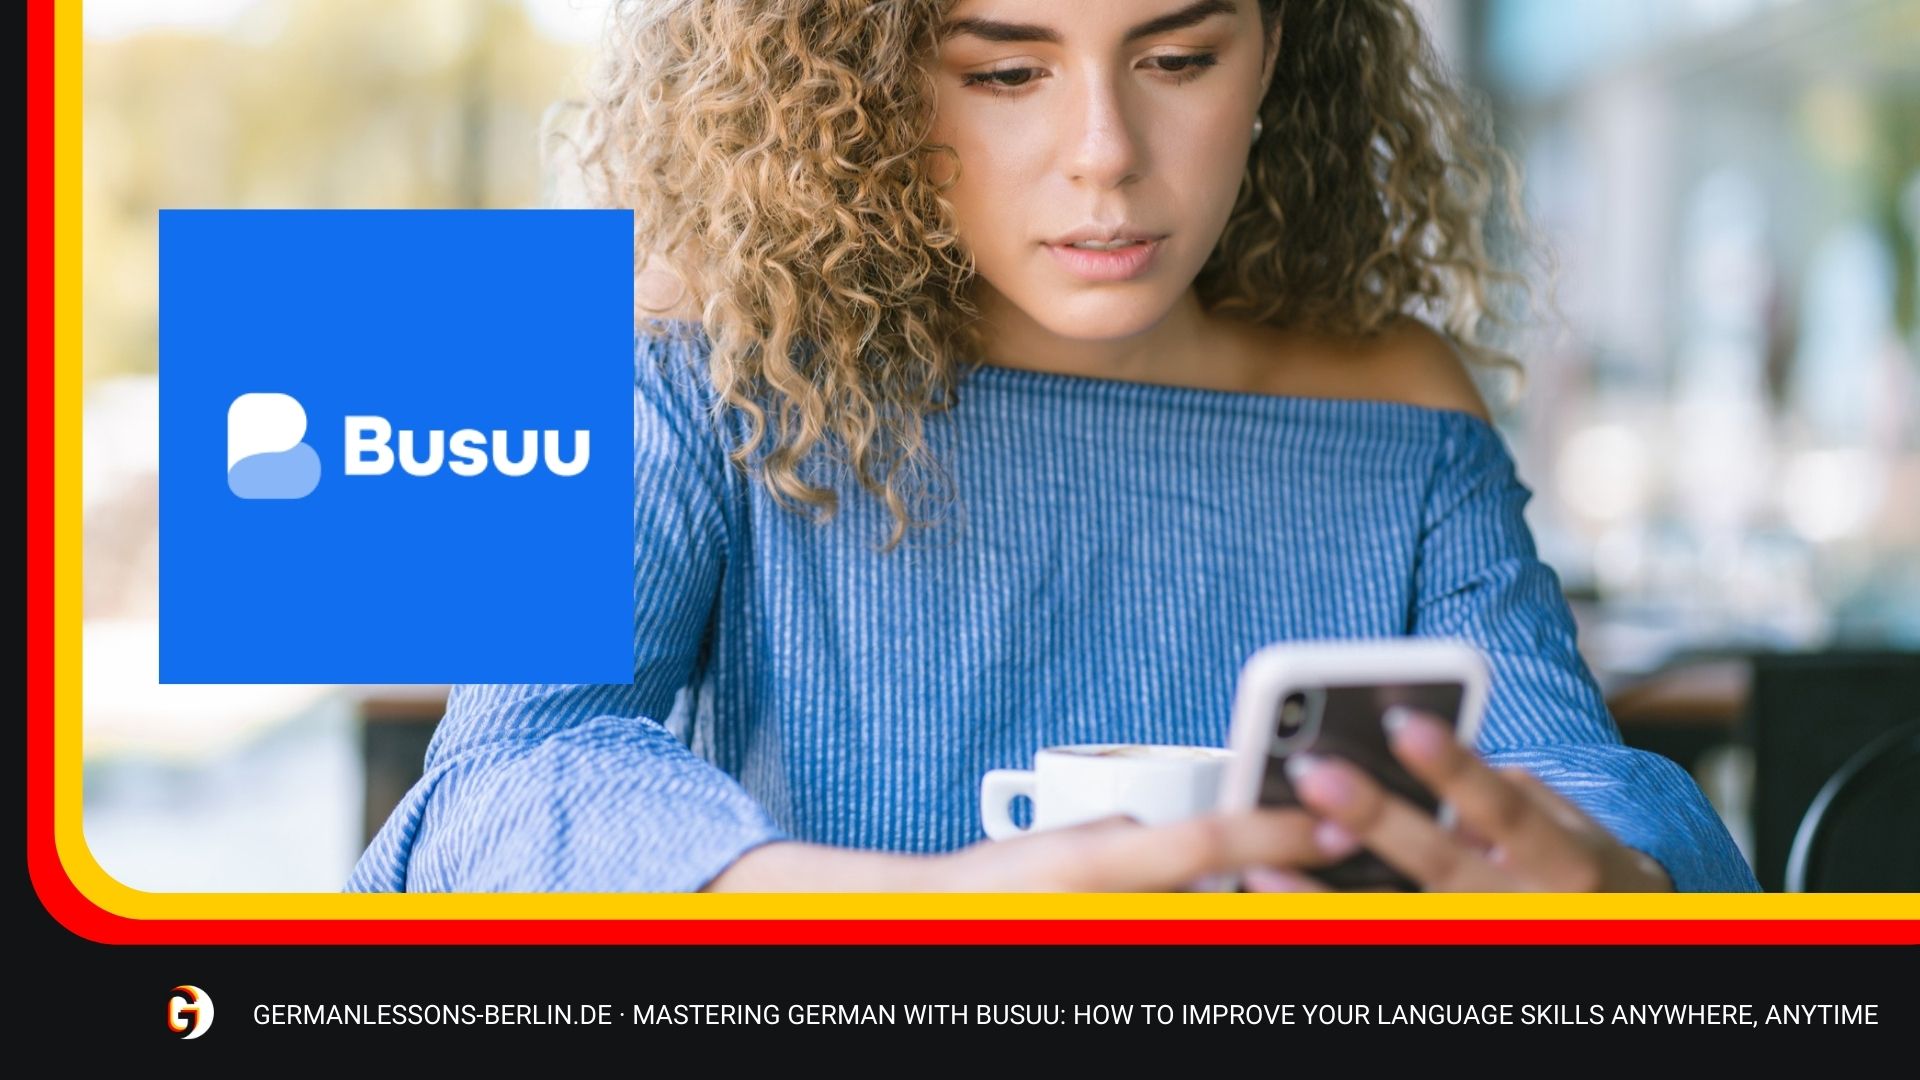 Mastering German With Busuu: How To Improve Your Language Skills Anywhere, Anytime